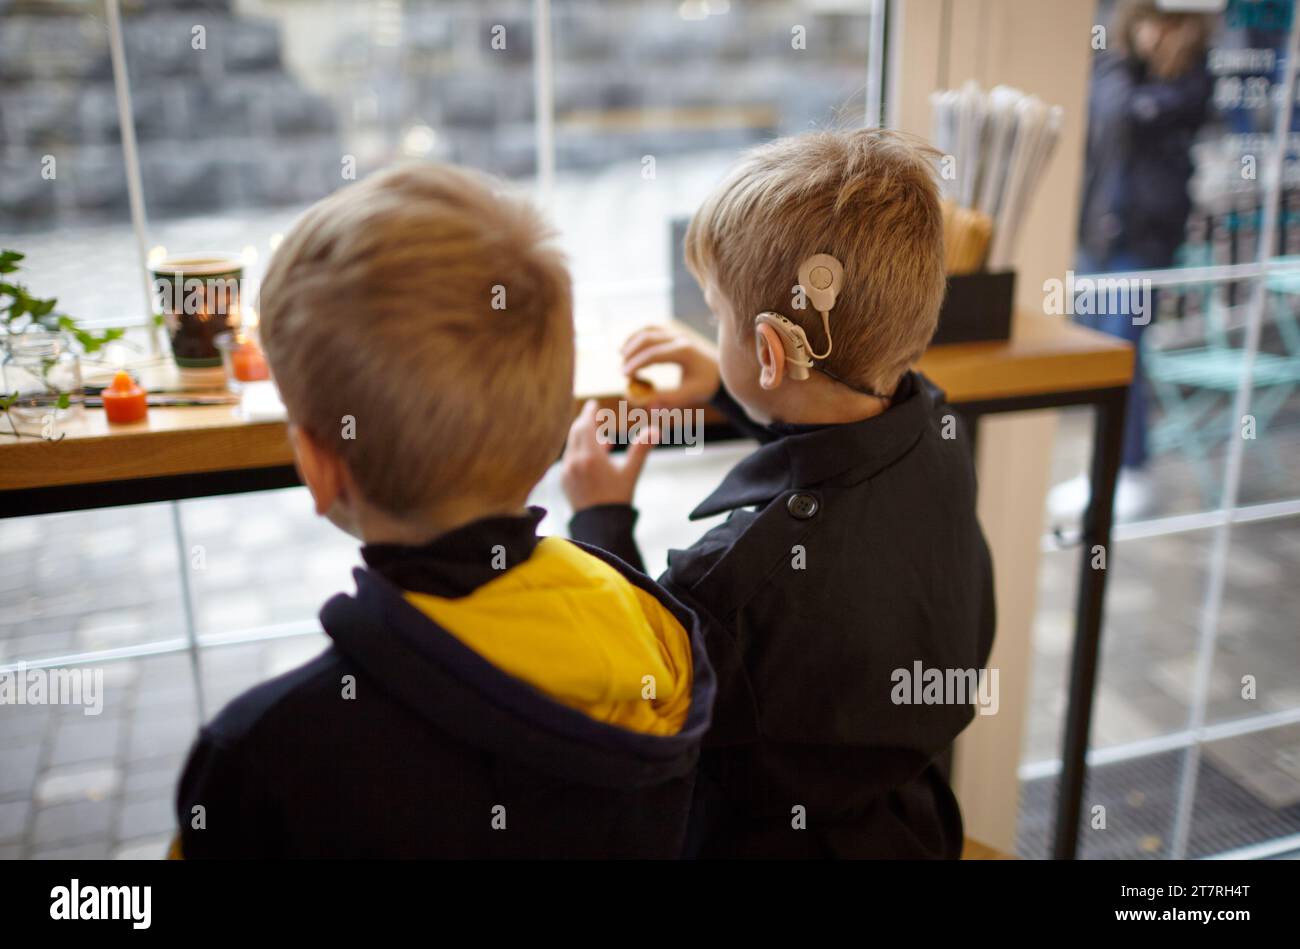 Boy have a Hearing Aids. Two twin brothers in a cafe. Selective focus, shallow depth of field Stock Photo